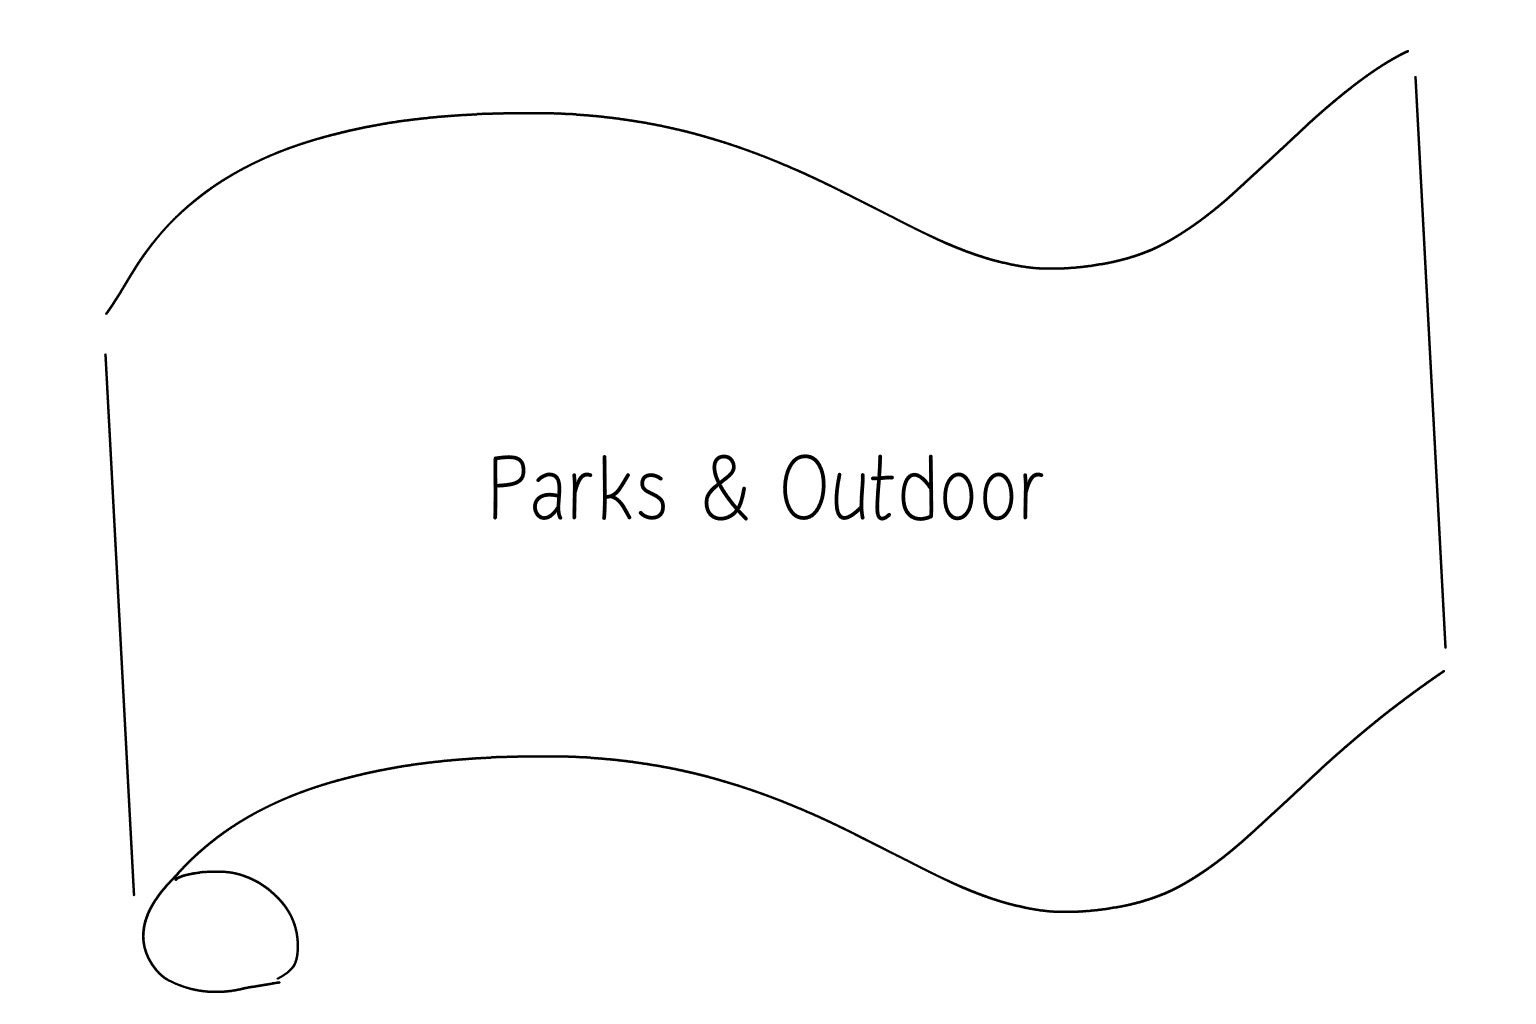 Illustration of wedding parks and outdoor